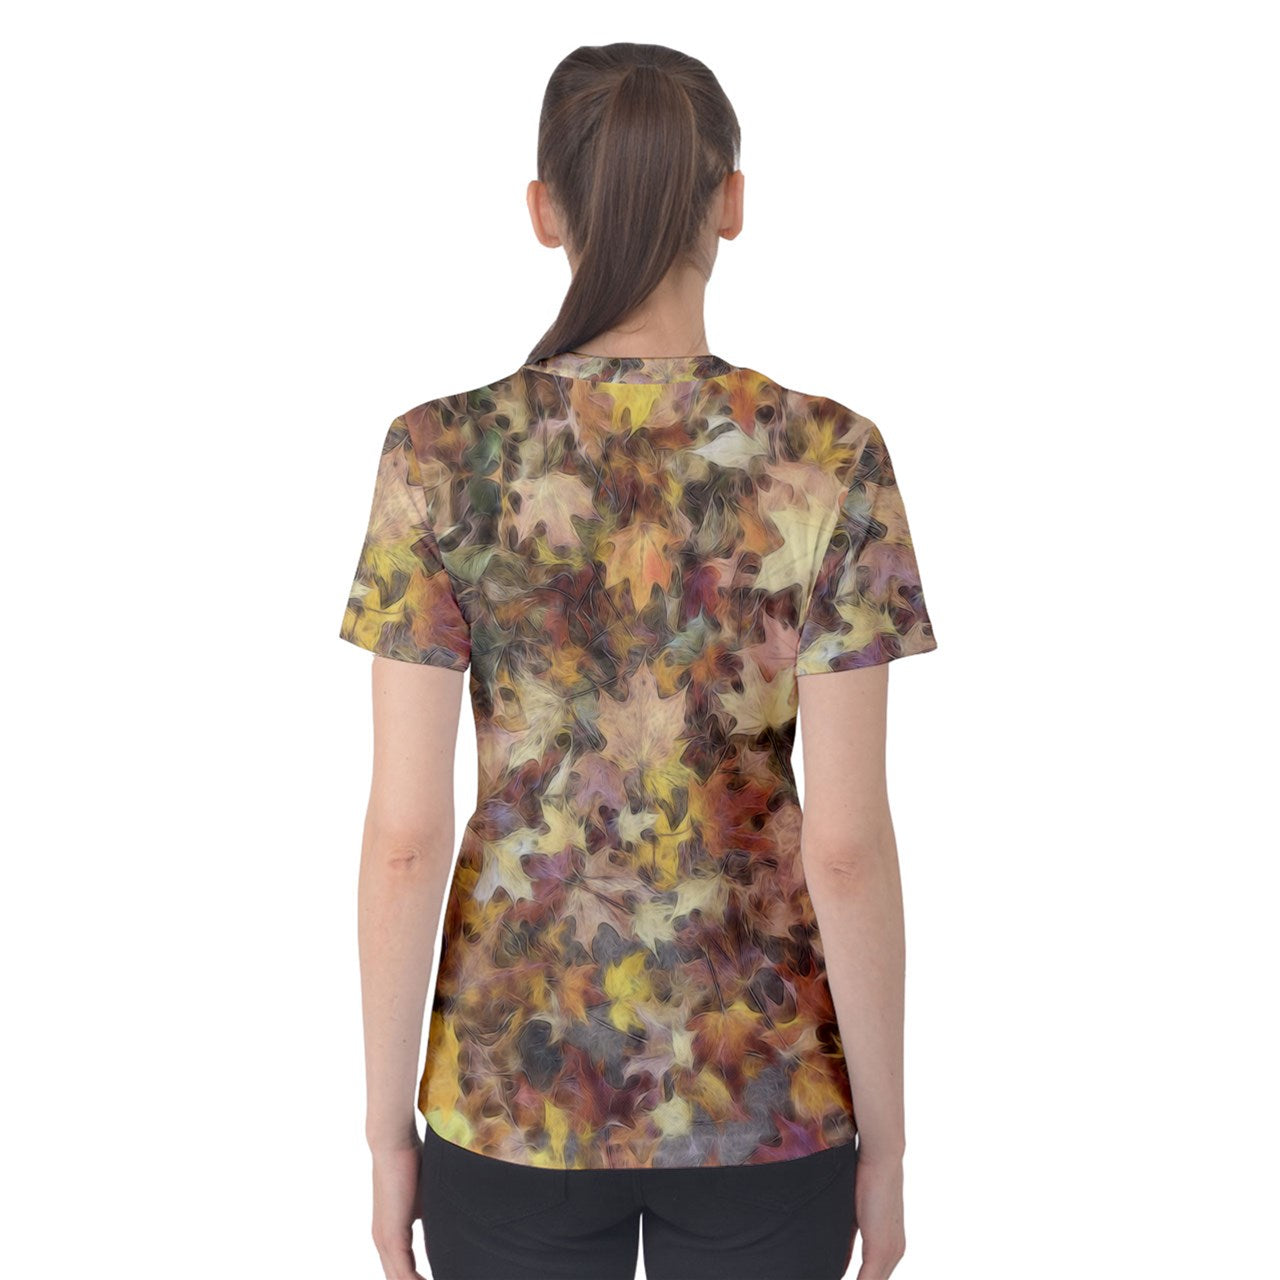 Late October Leaves Light Women's Cotton Tee